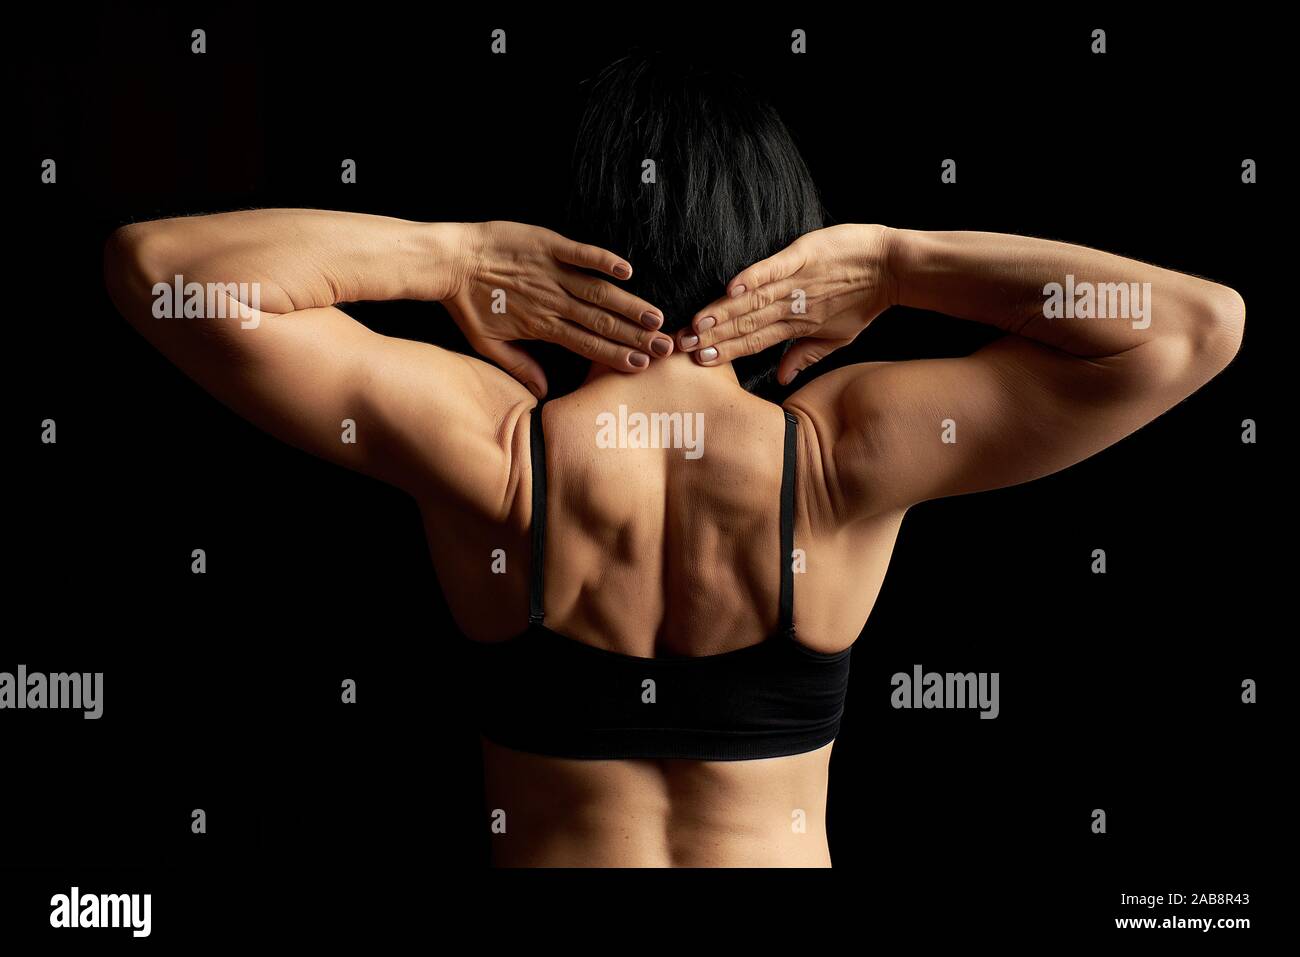 Athletic Young Woman Showing Muscles Of The Back Stock Photo